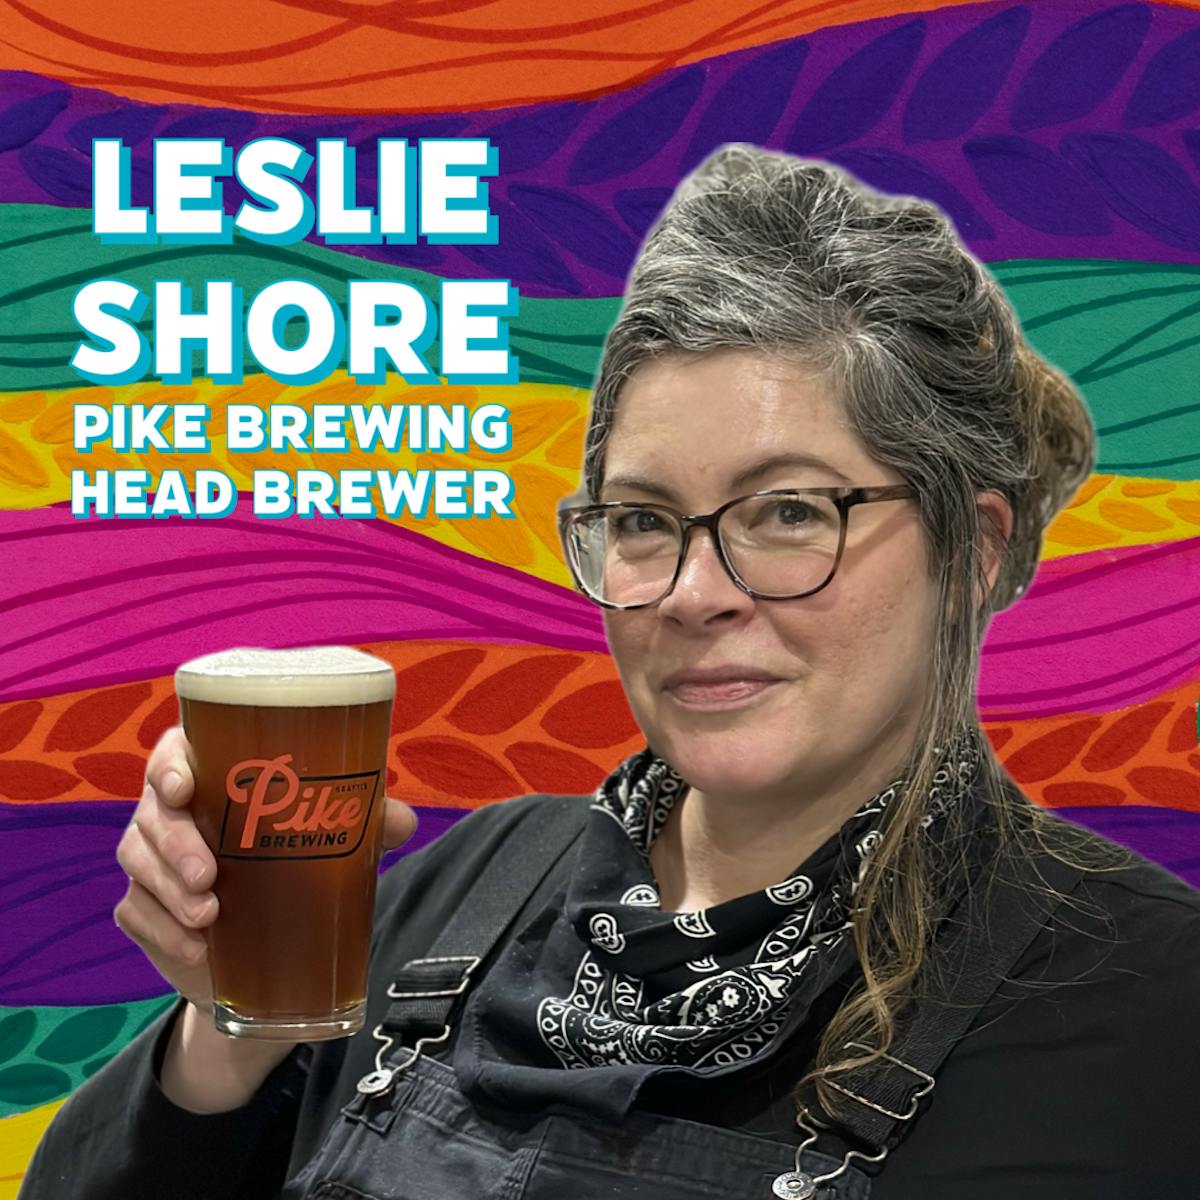 Pike Brewing Head Brewer Leslie Shore